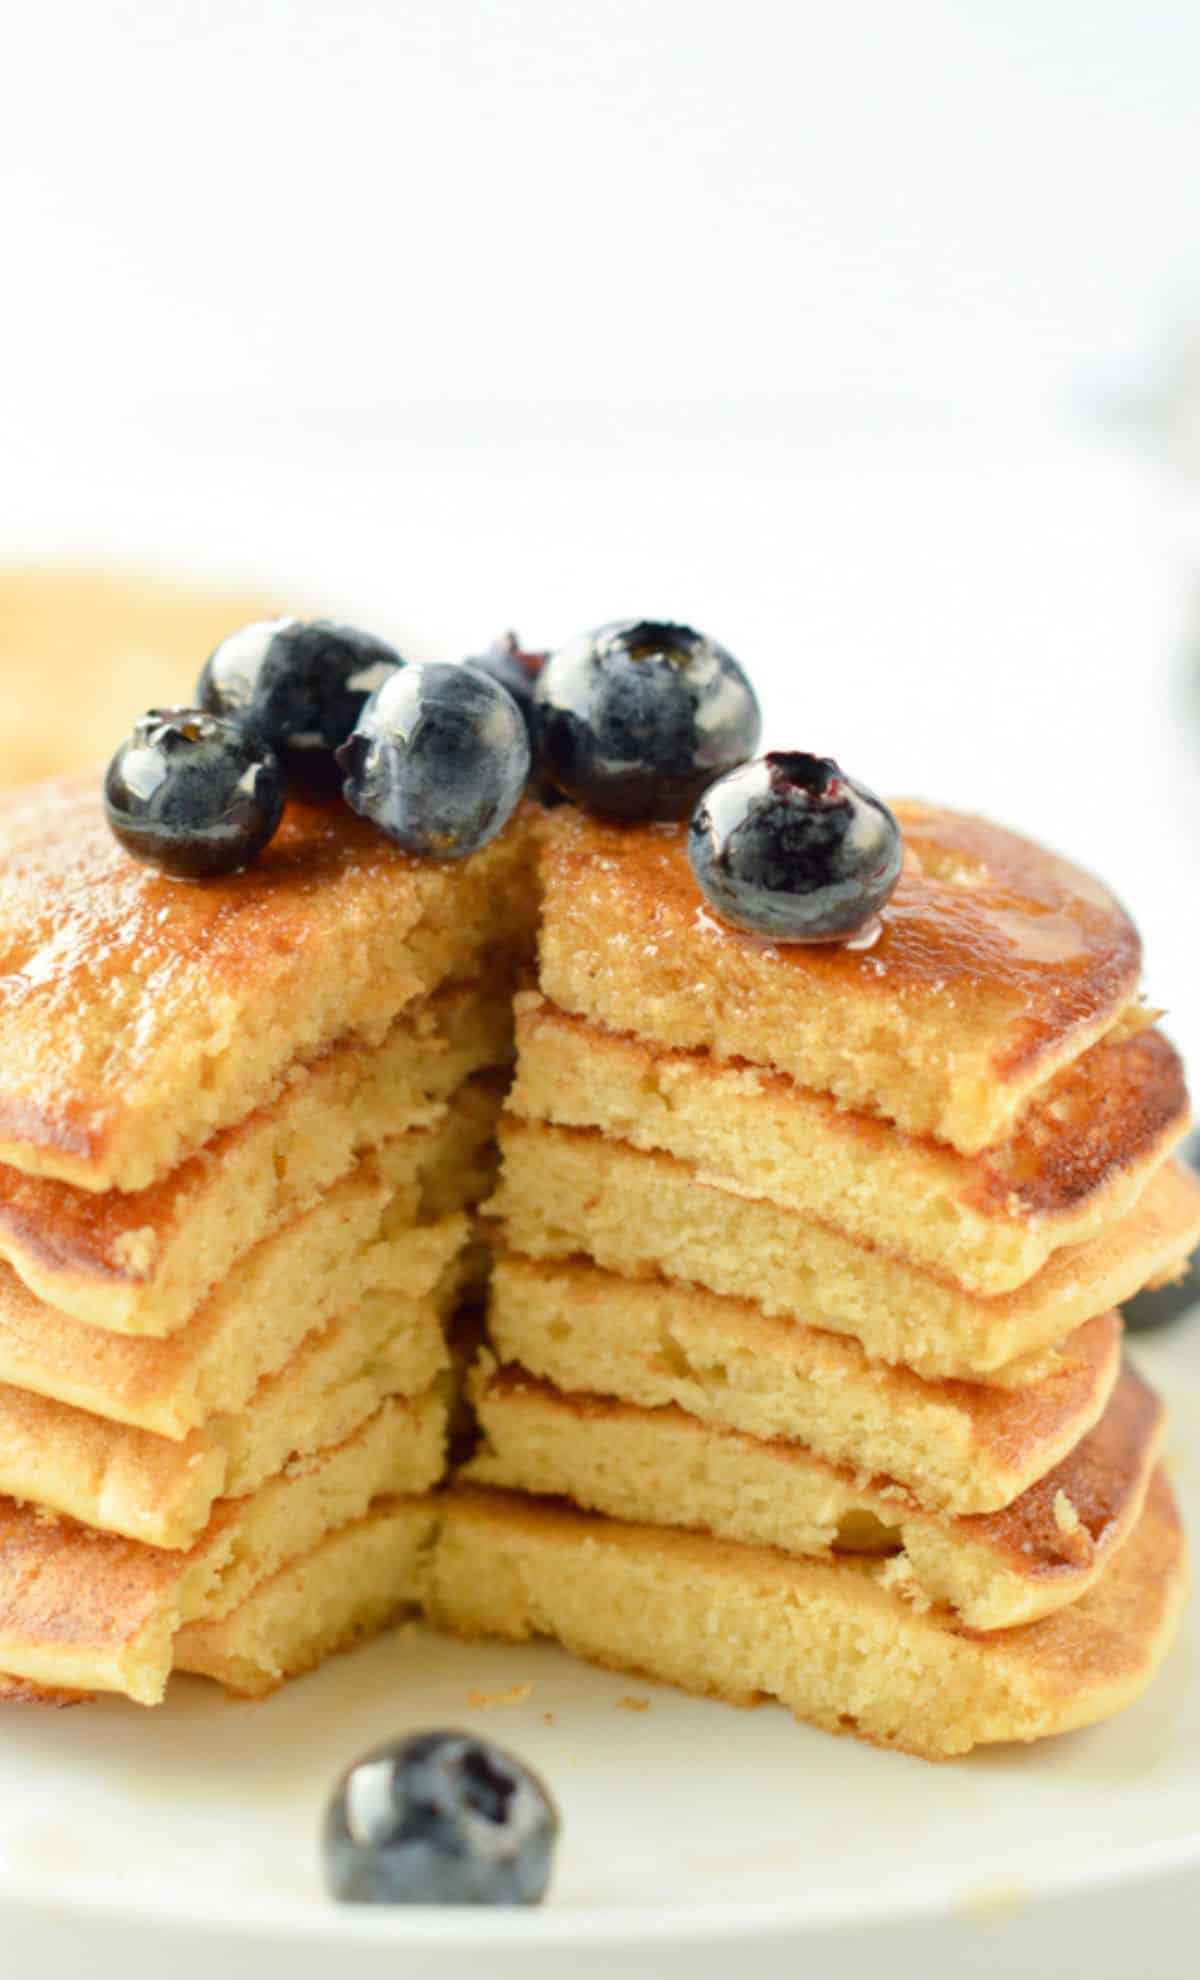 Stack of chickpea pancakes decorated with blueberries.